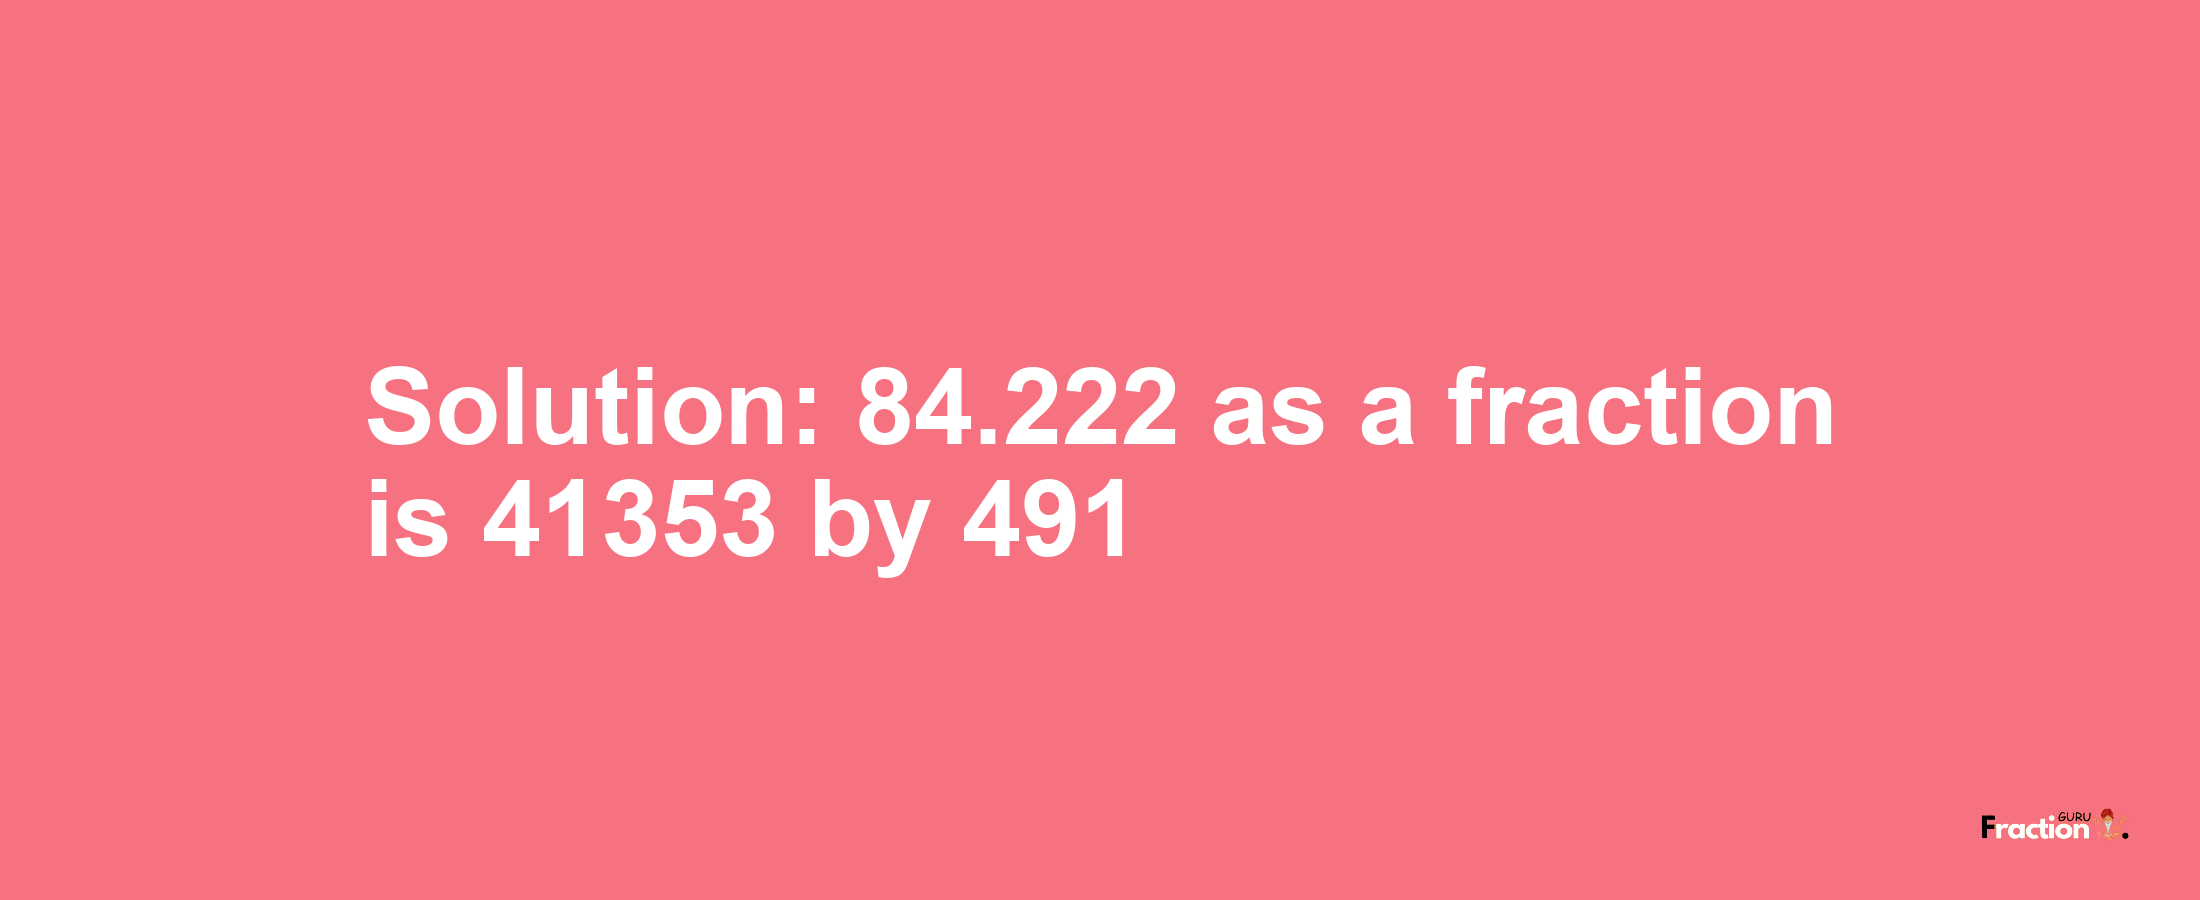 Solution:84.222 as a fraction is 41353/491